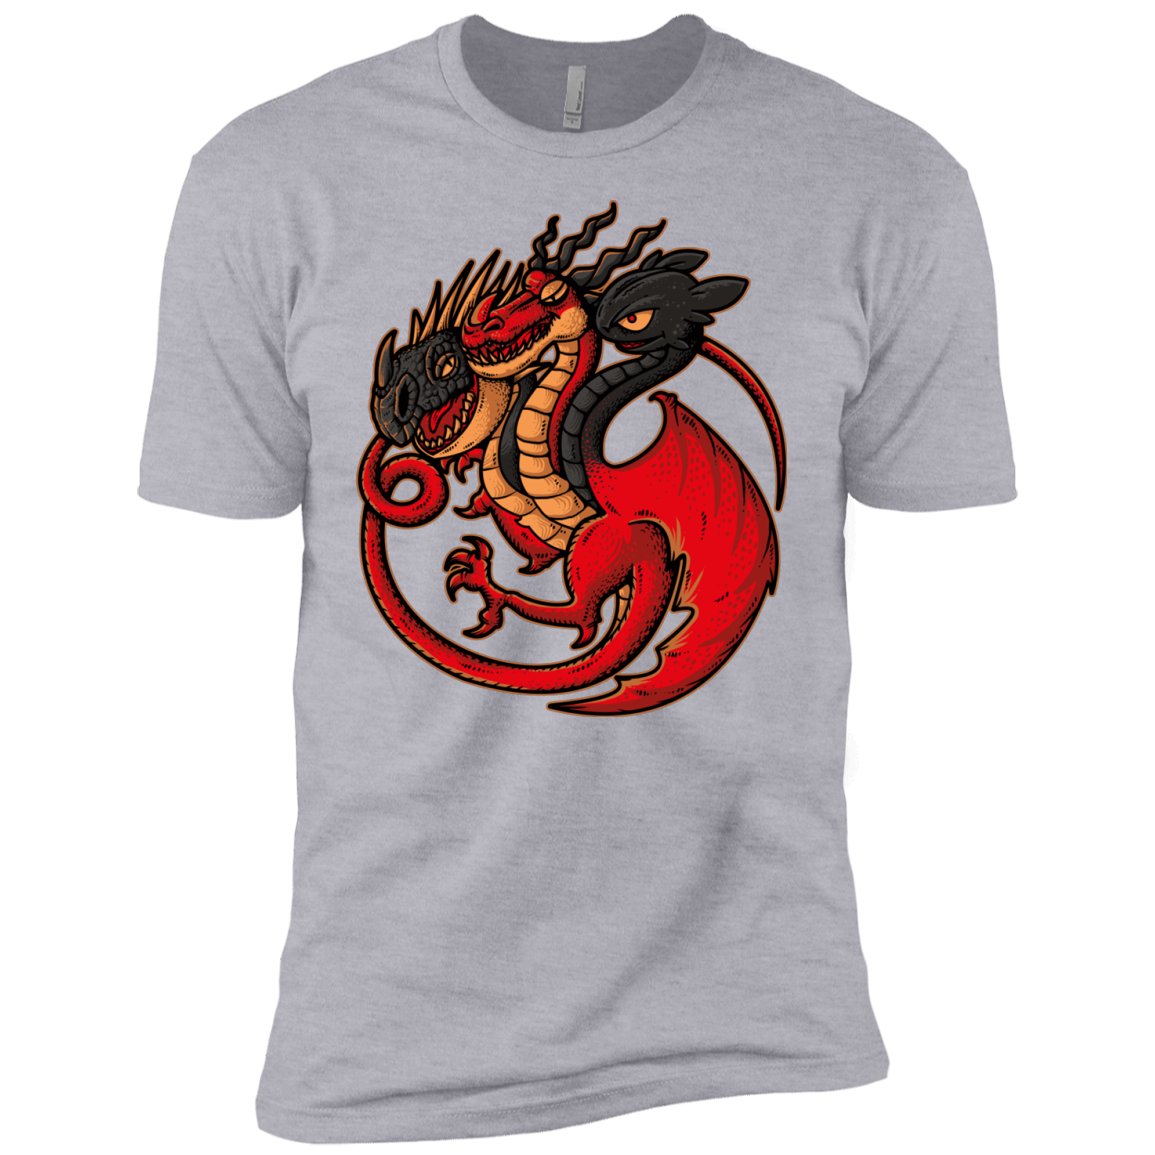 FIRE BLOOD AND TRAINING Boys Premium T-Shirt